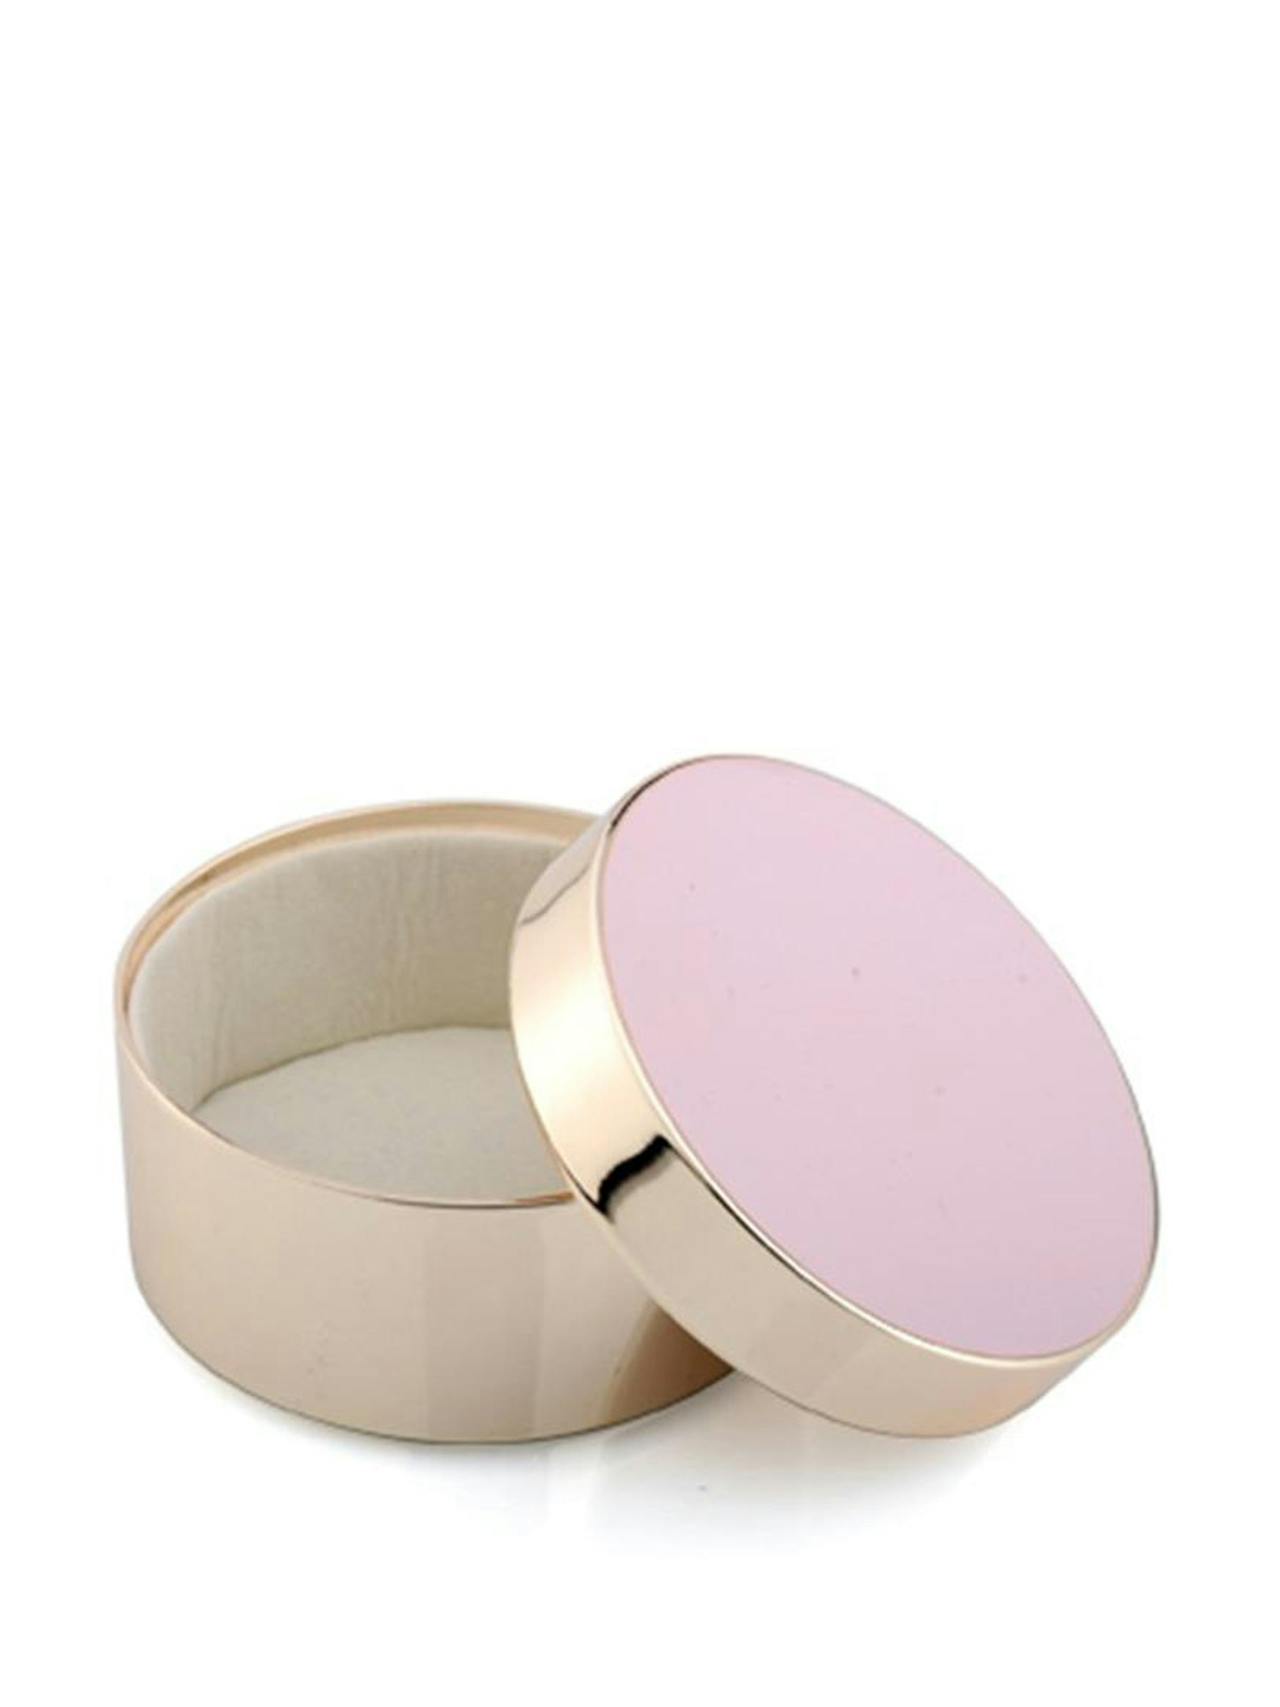 Beautiful small pastel pink enamel and gold plate trinket pot by Addison Ross. Lined in soft stone coloured velvet with a removable lid | Collagerie.com